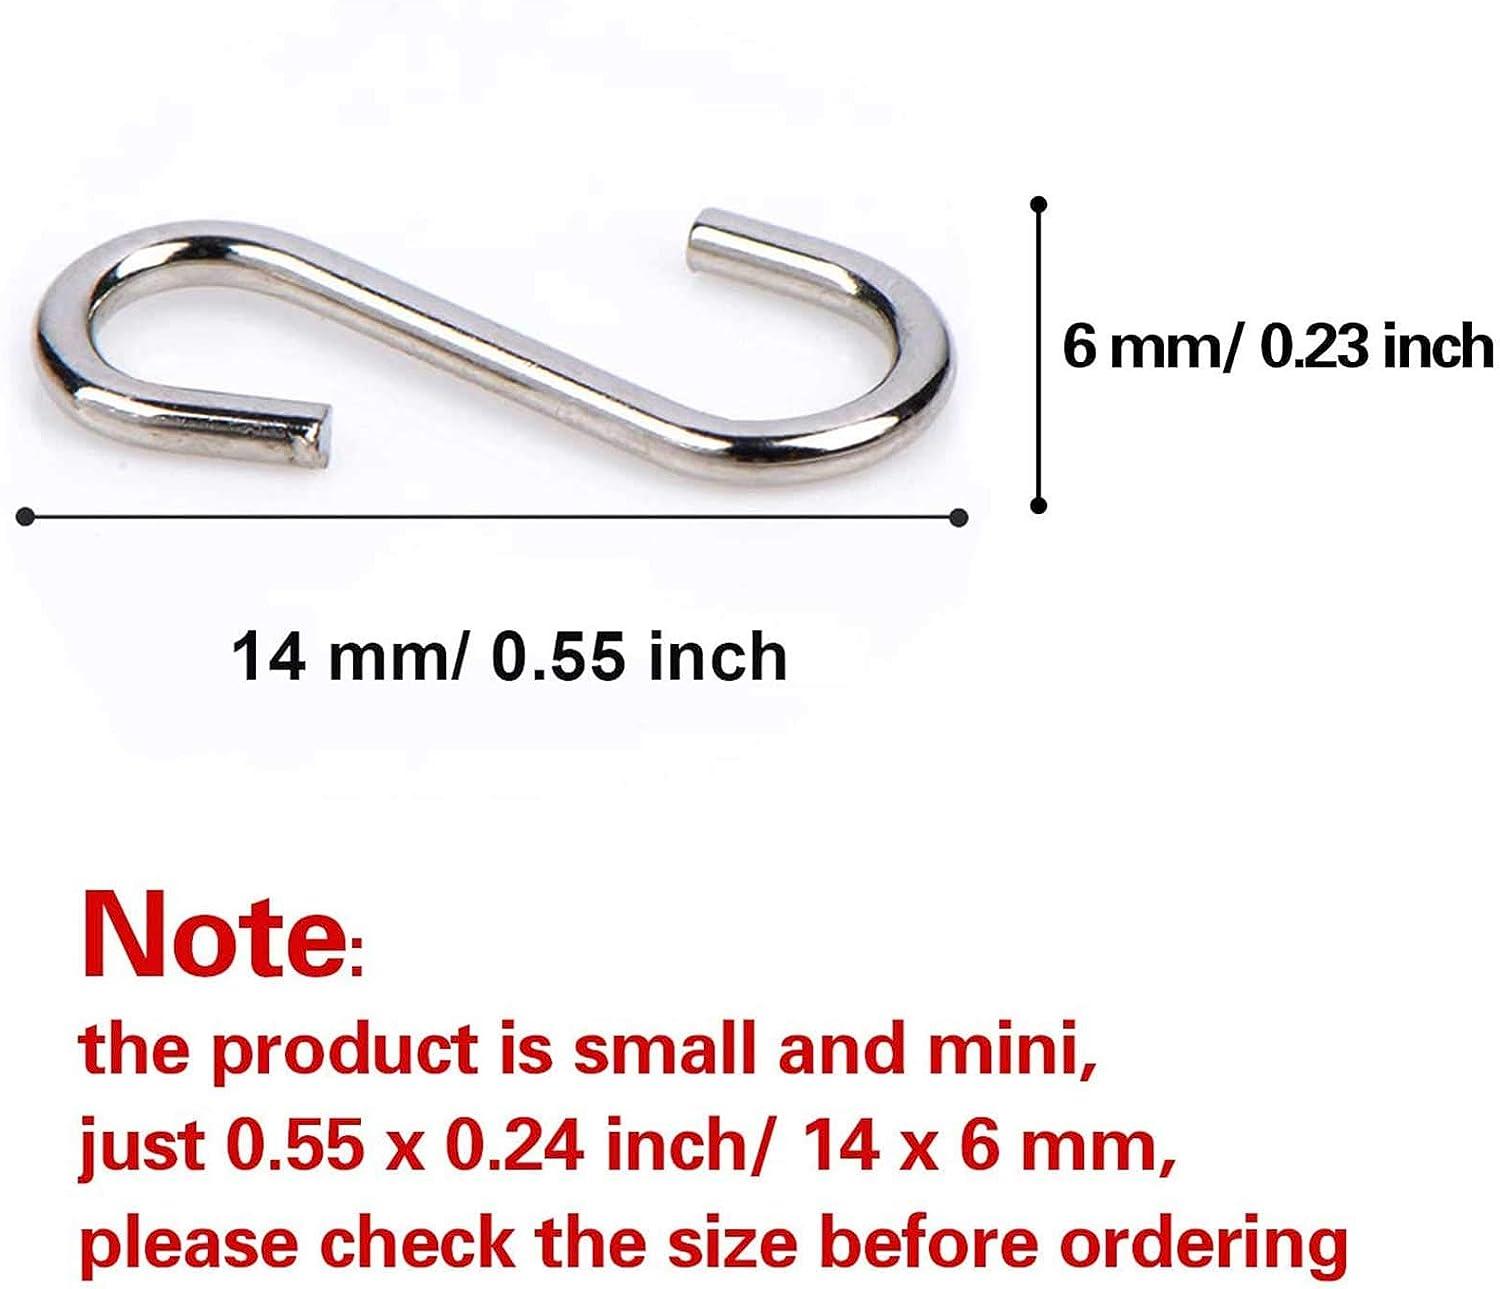 Mini S Hooks Connectors S Shaped Wire Hook Hangers 100pcs Hanging Hooks for  DIY Crafts, Hanging Jewelry, Key Chain, Tags, Fishing Lure, Net Equipment